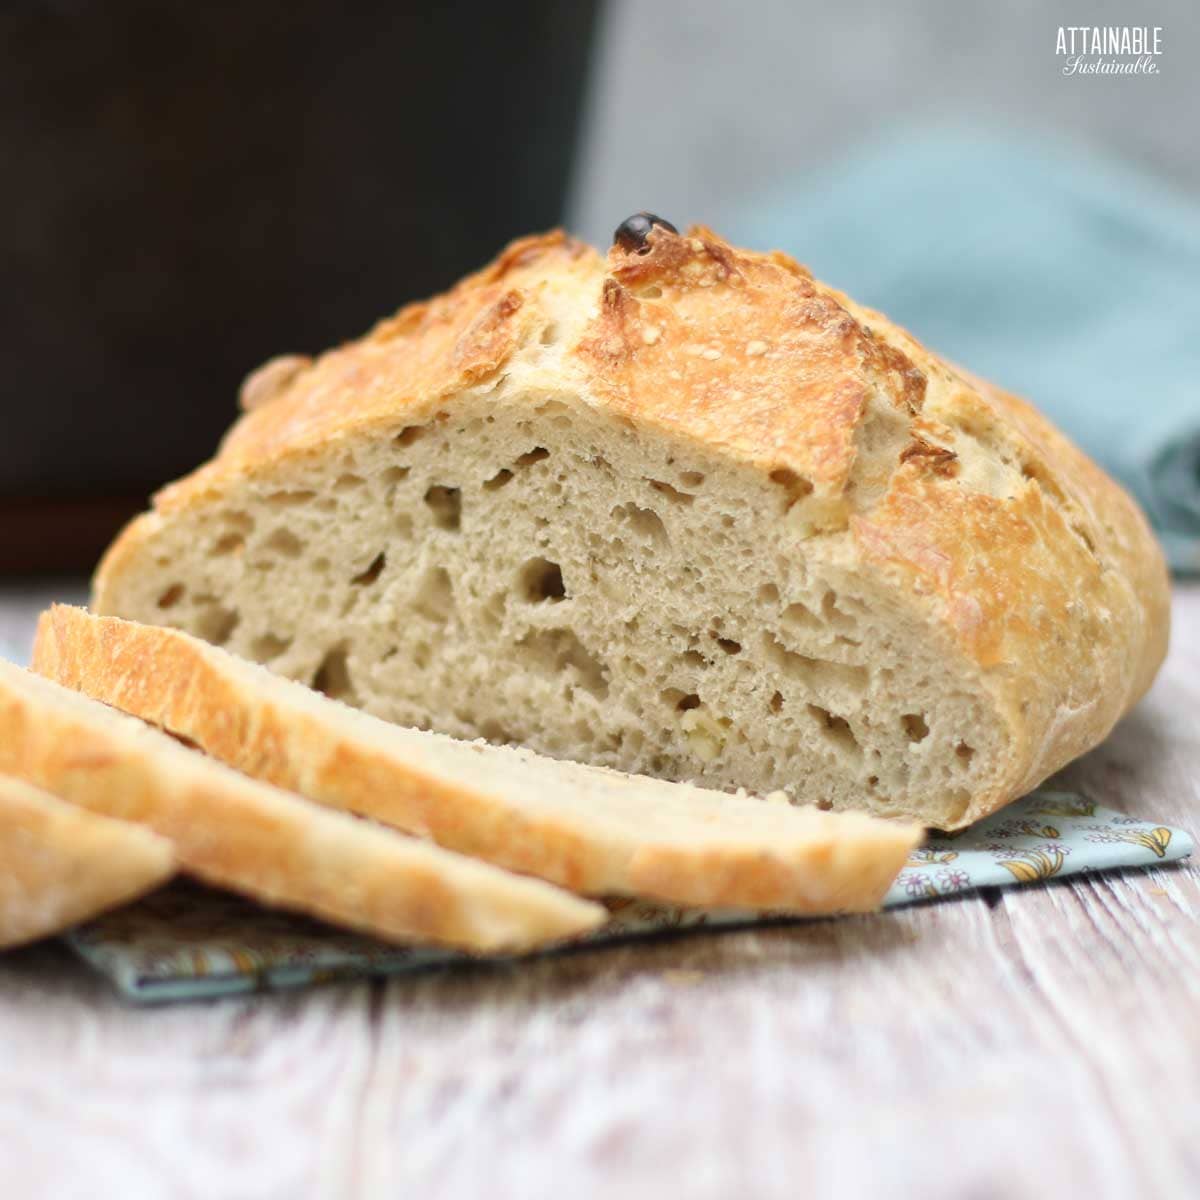 https://www.attainable-sustainable.net/wp-content/uploads/2020/04/no-knead-bread-2.jpg